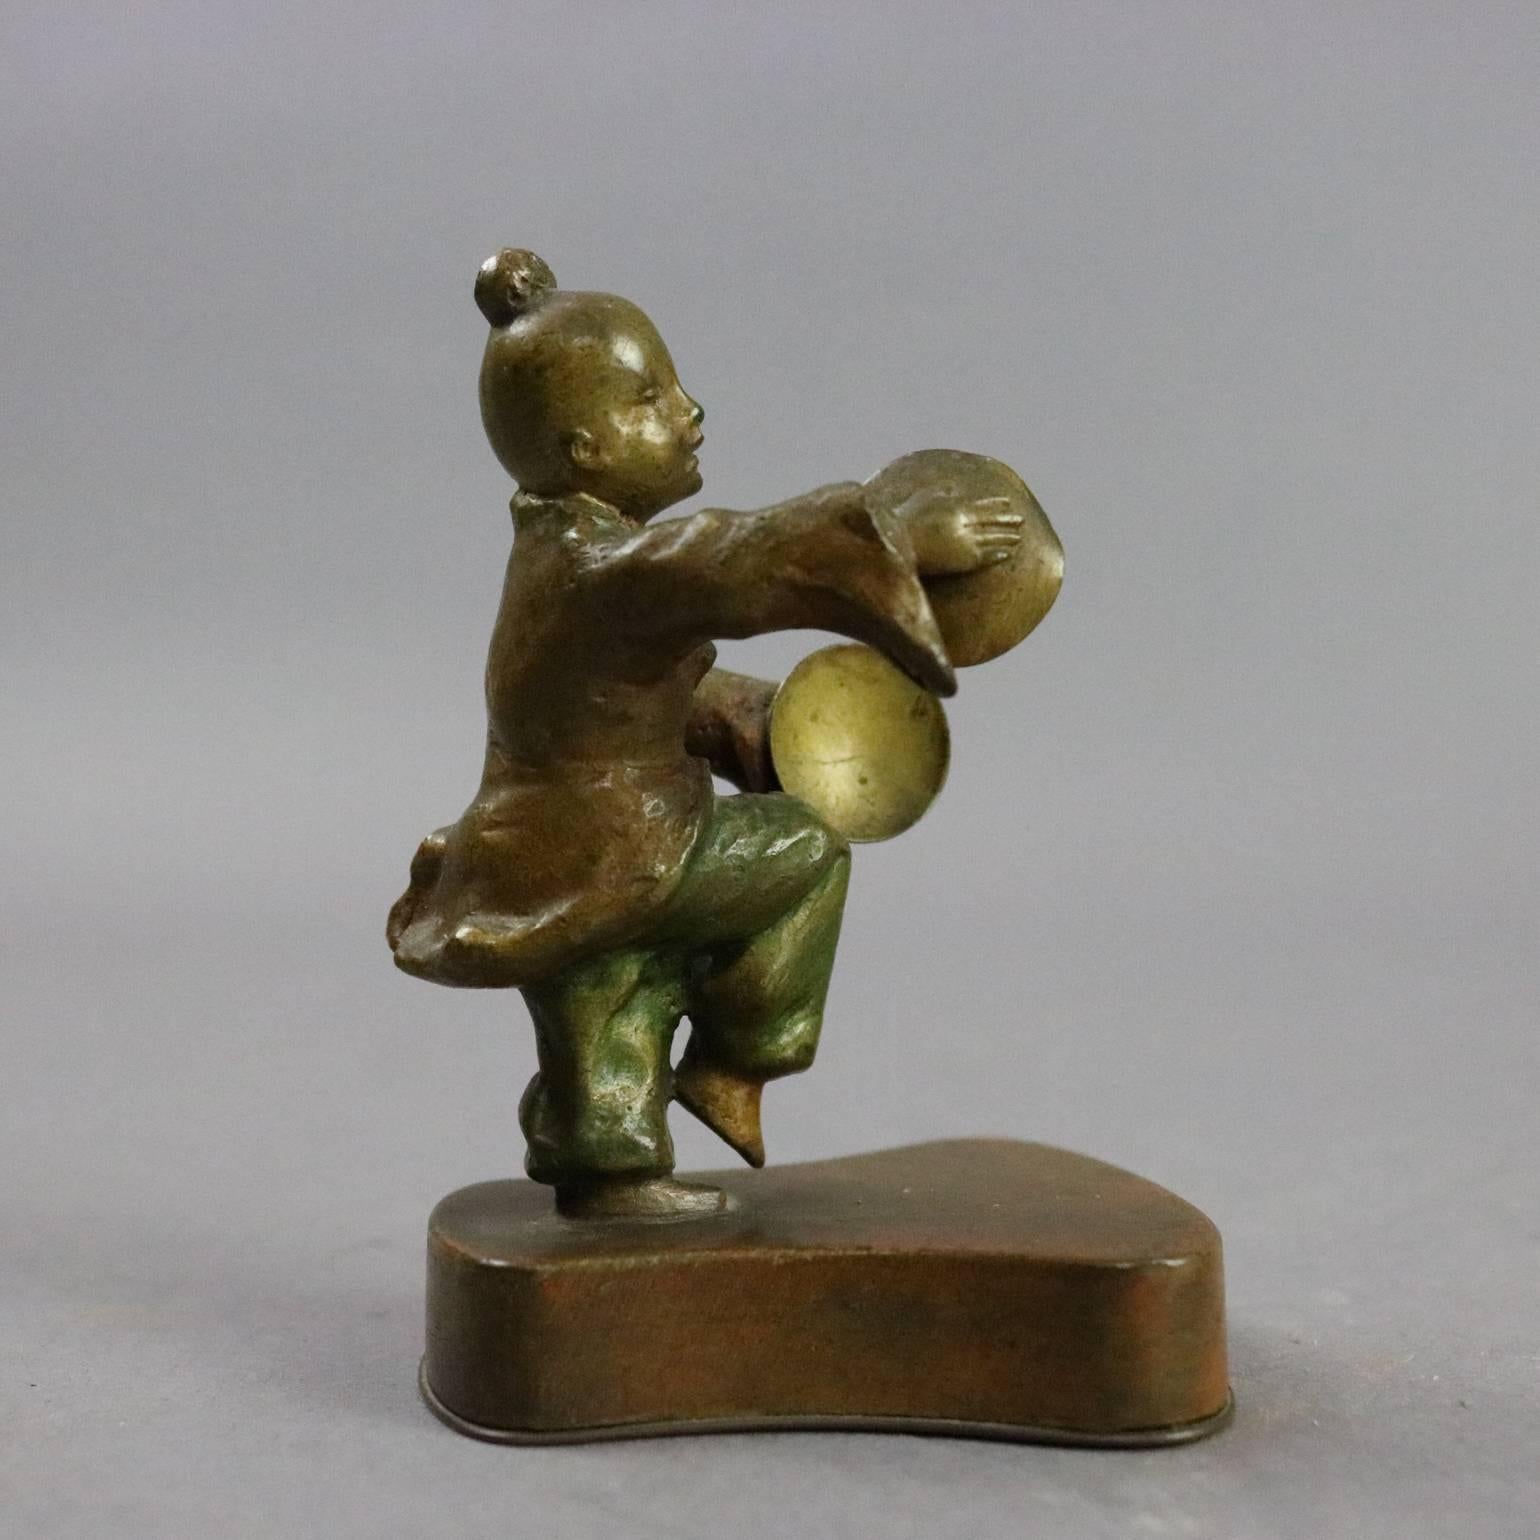 Lot of two Austrian cold painted bronze sculptures depict Japanese musical and dance street performers, circa 1900

Measure: 3.5